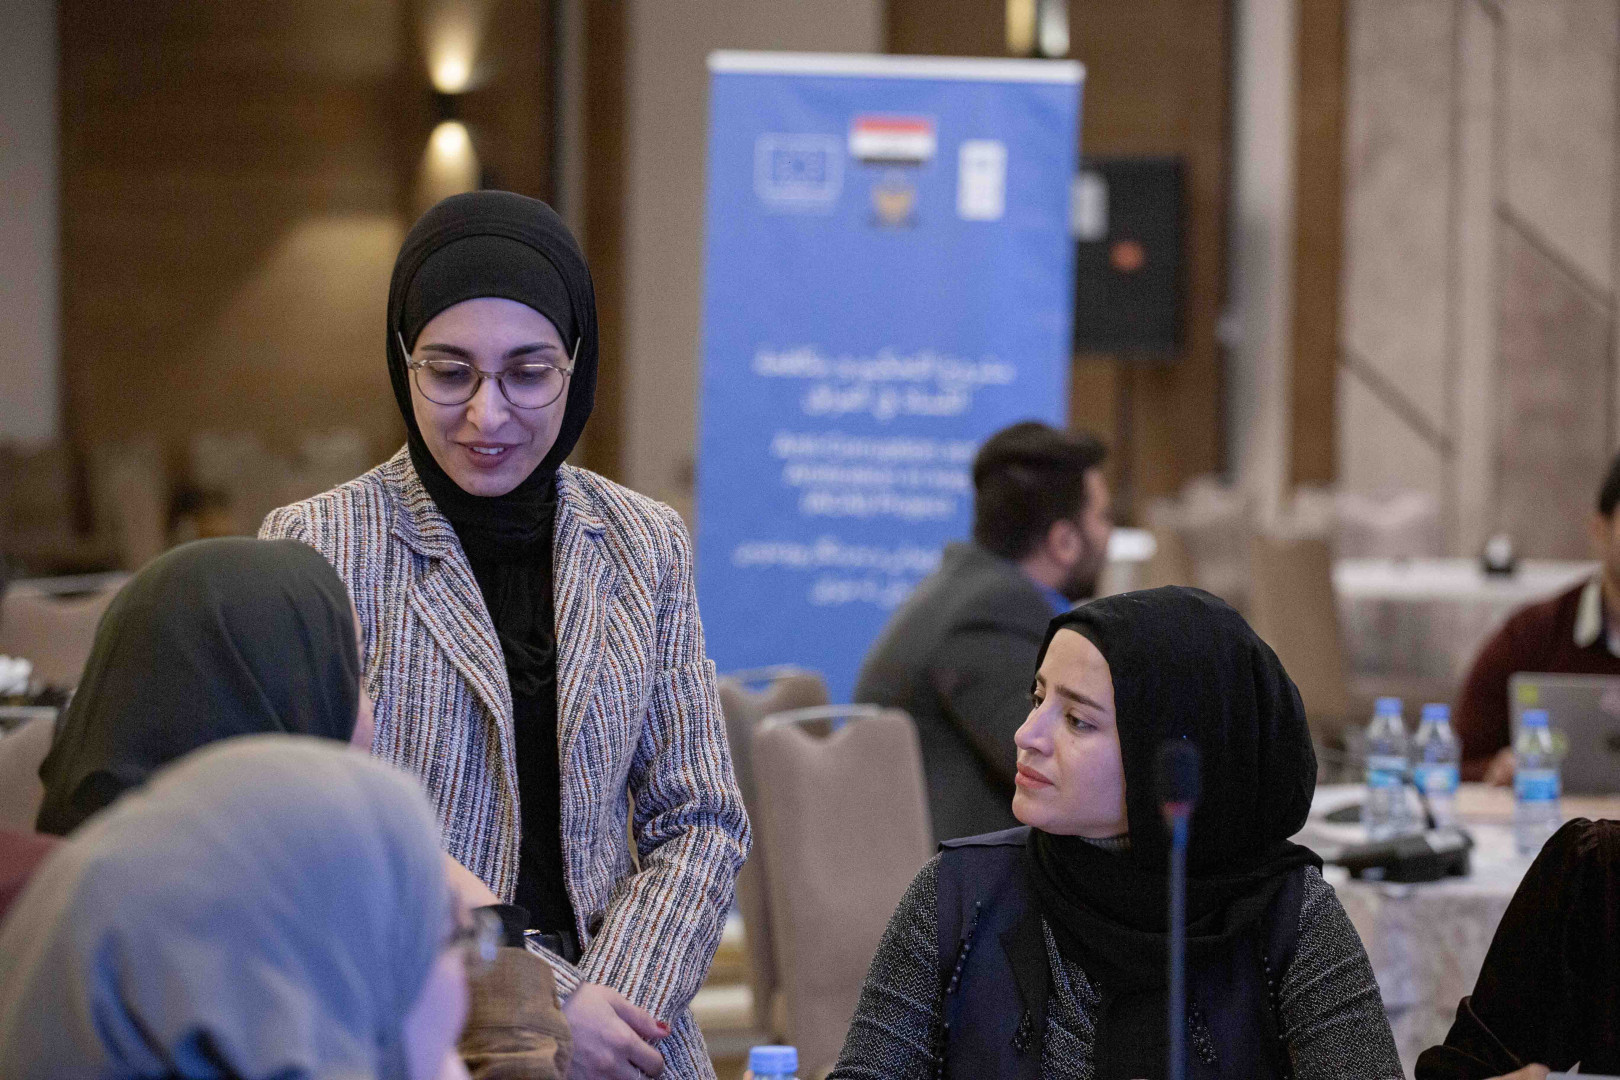 Trained by UN, Iraqi journalists, activists establish network to tackle endemic corruption